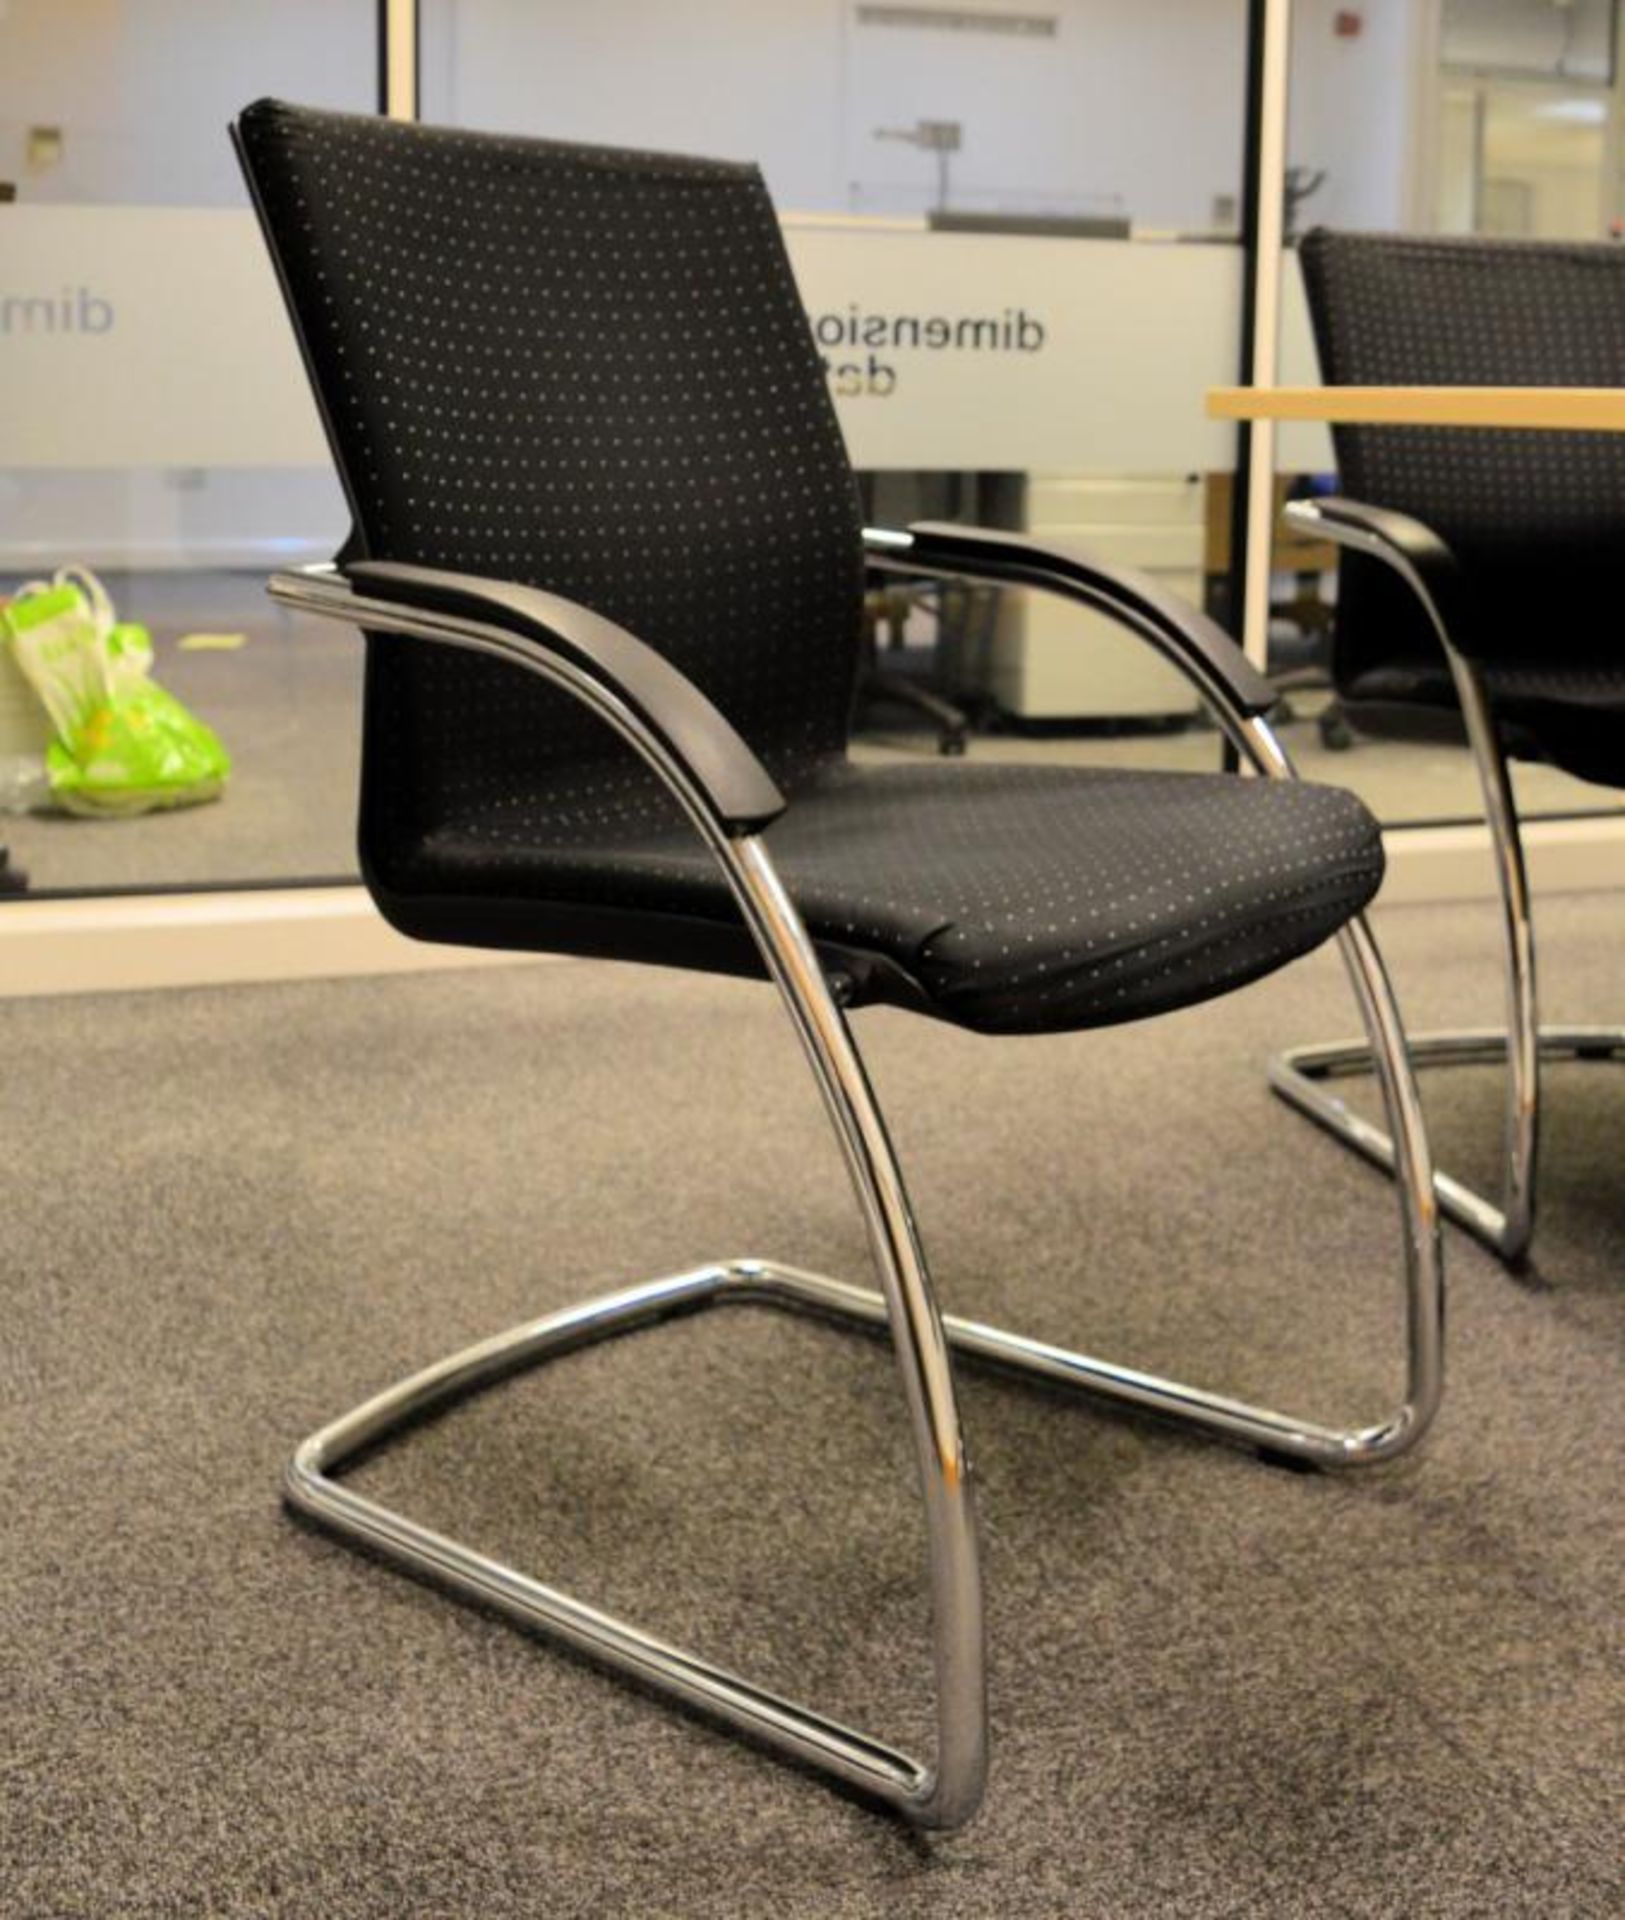 8 x Stackable Boardroom Meeting Chairs in Black With Chrome Stands and Arm Rests - Contemporary